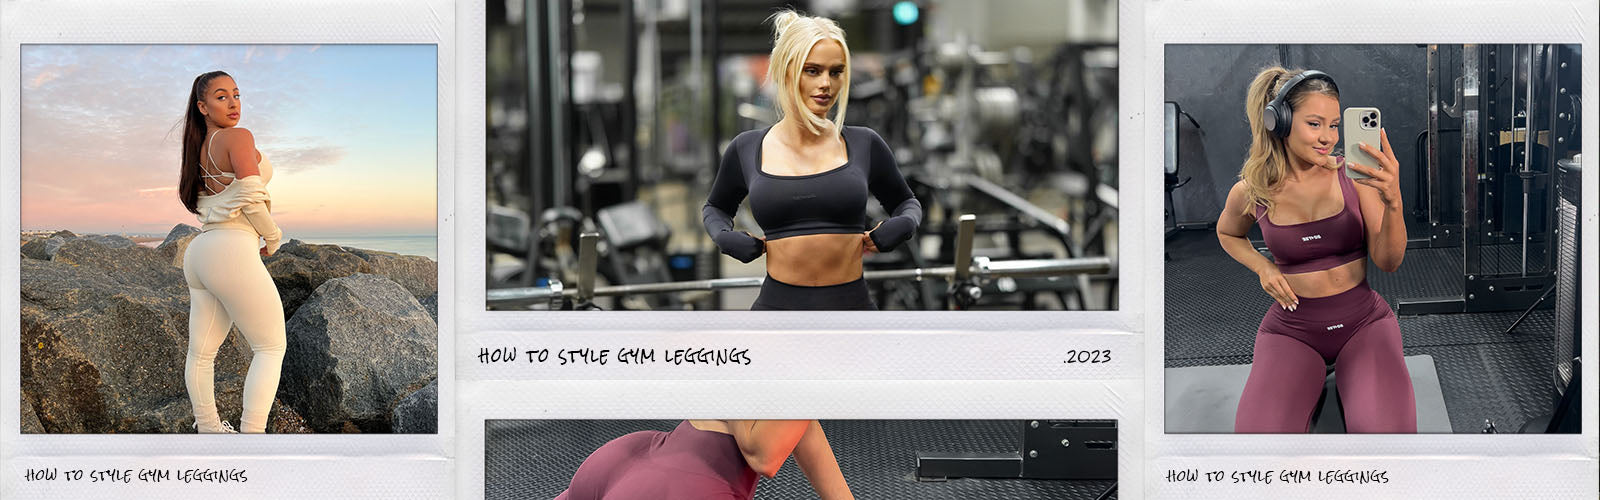 How To: Style Gym Leggings